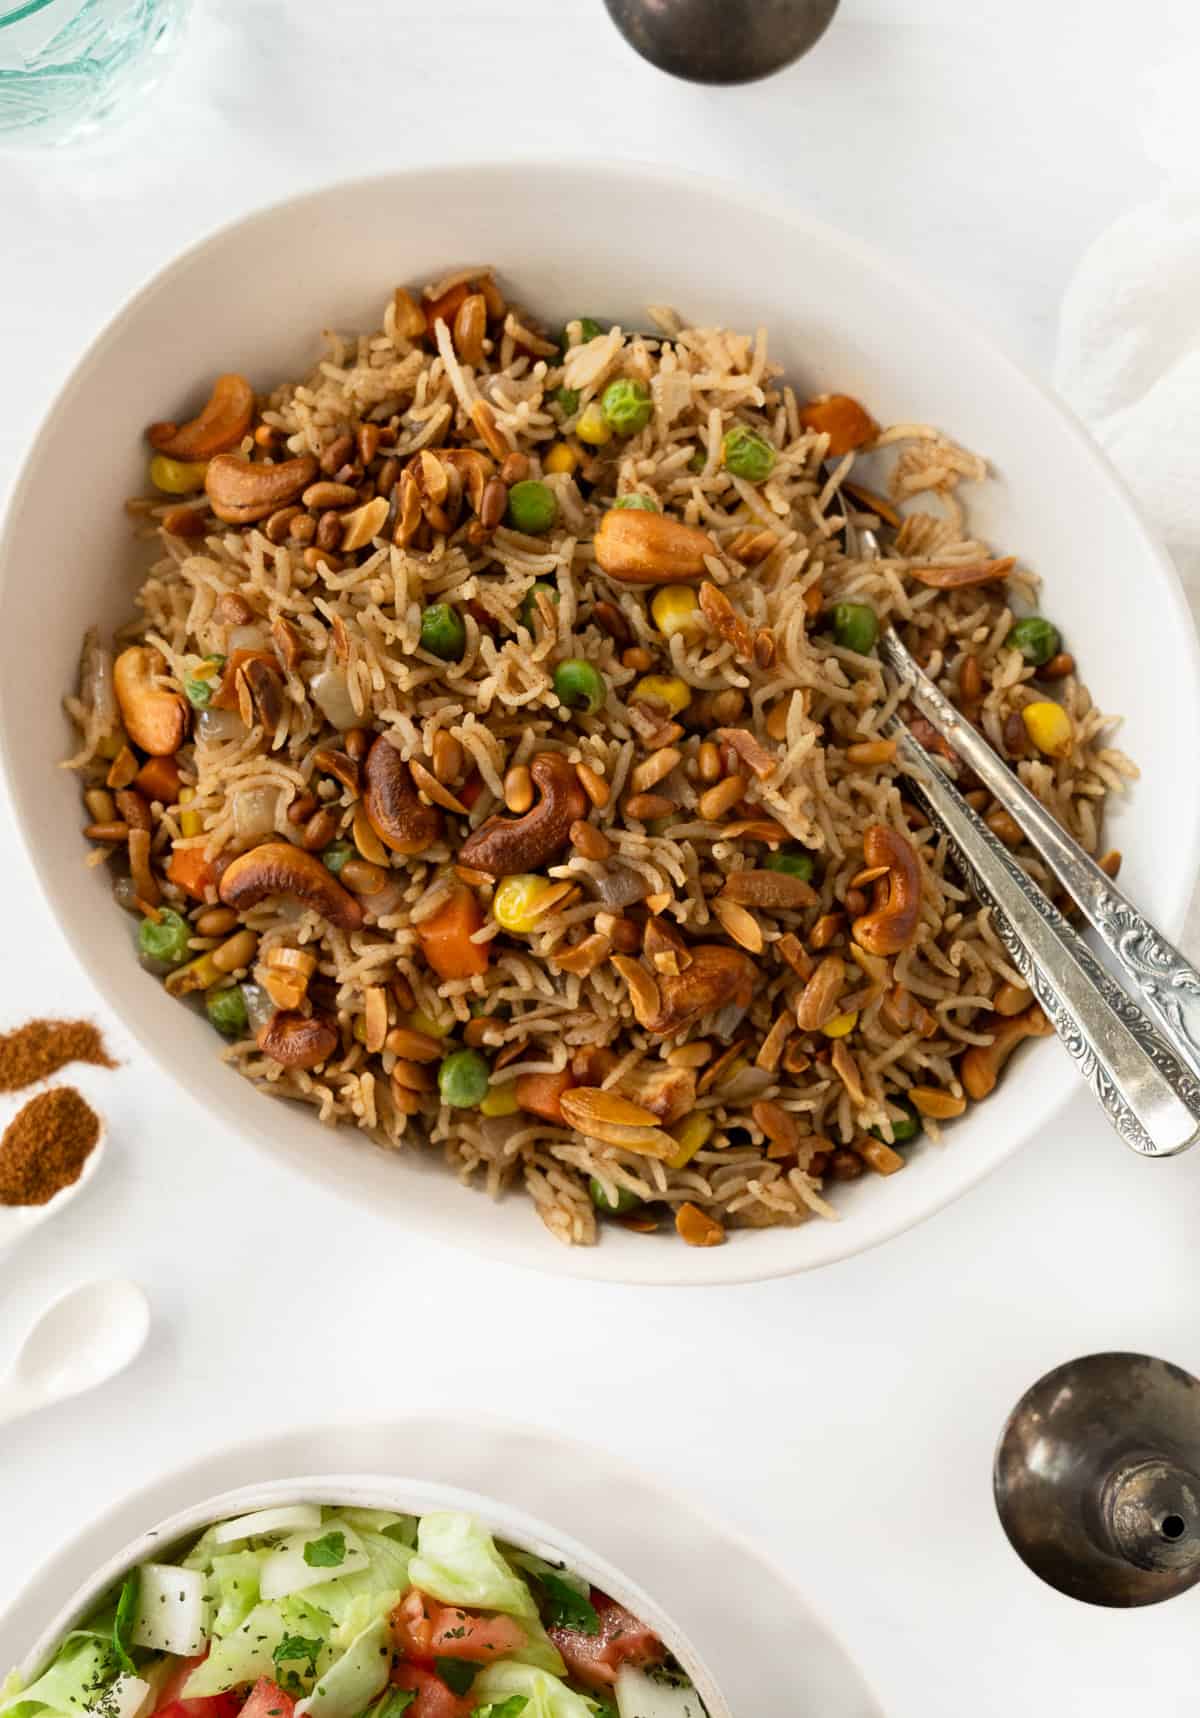 a bowl of spiced cooked rice with veggies and toasted nuts